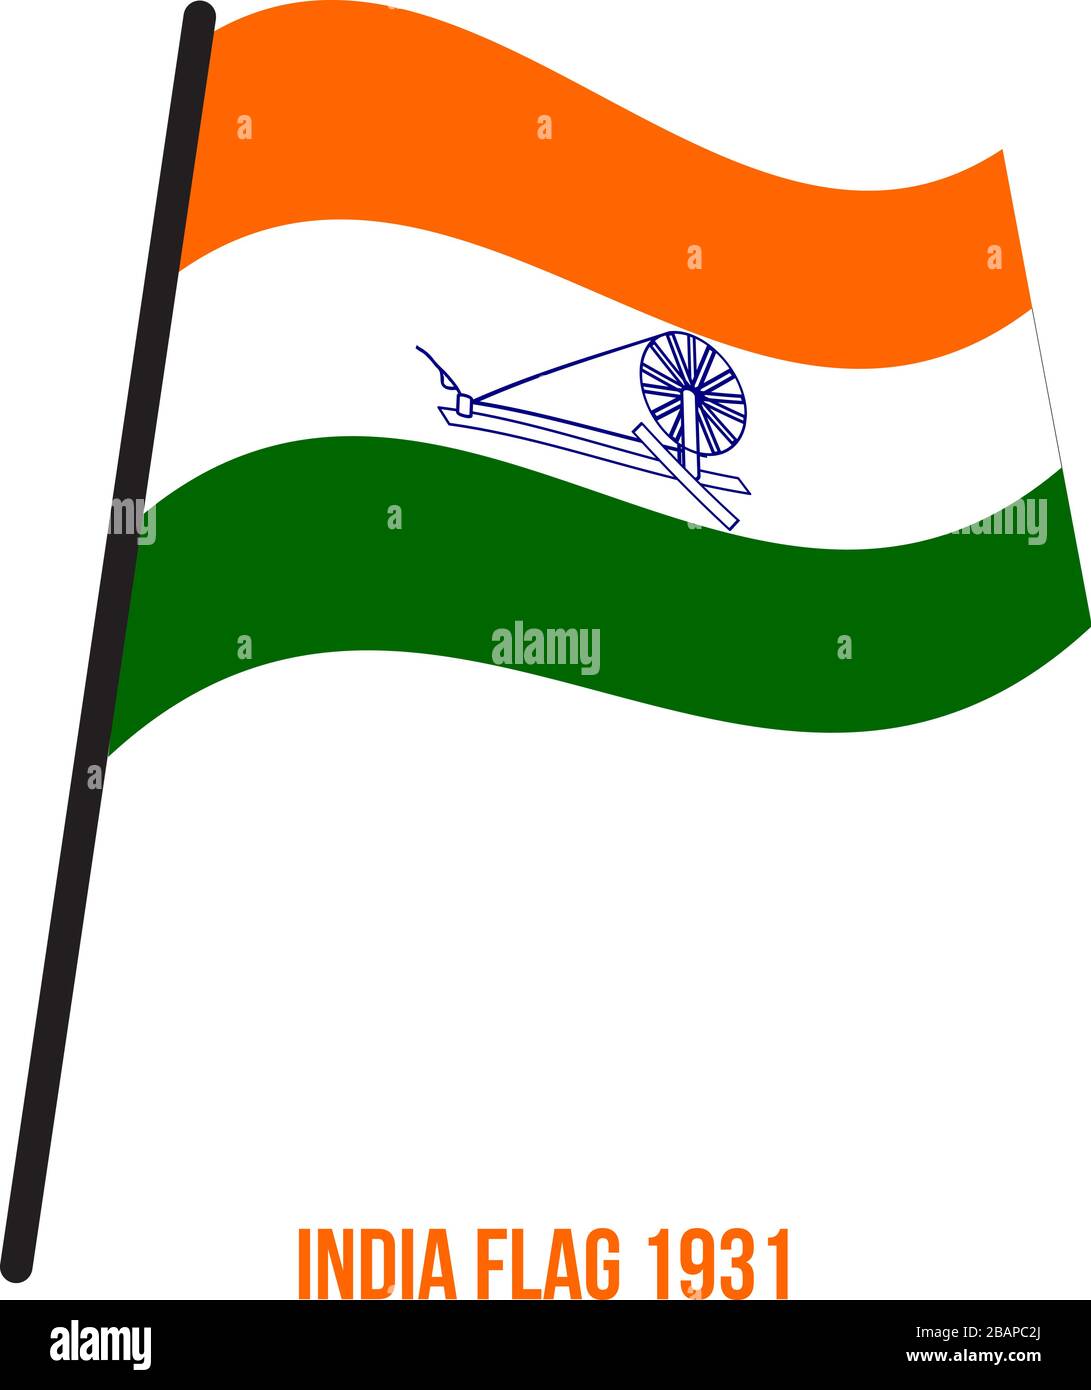 India Flag Waving 1931 Vector Illustration on White Background. Swaraj Flag Officially Adopted By The Indian National Congress in 1931. Stock Vector